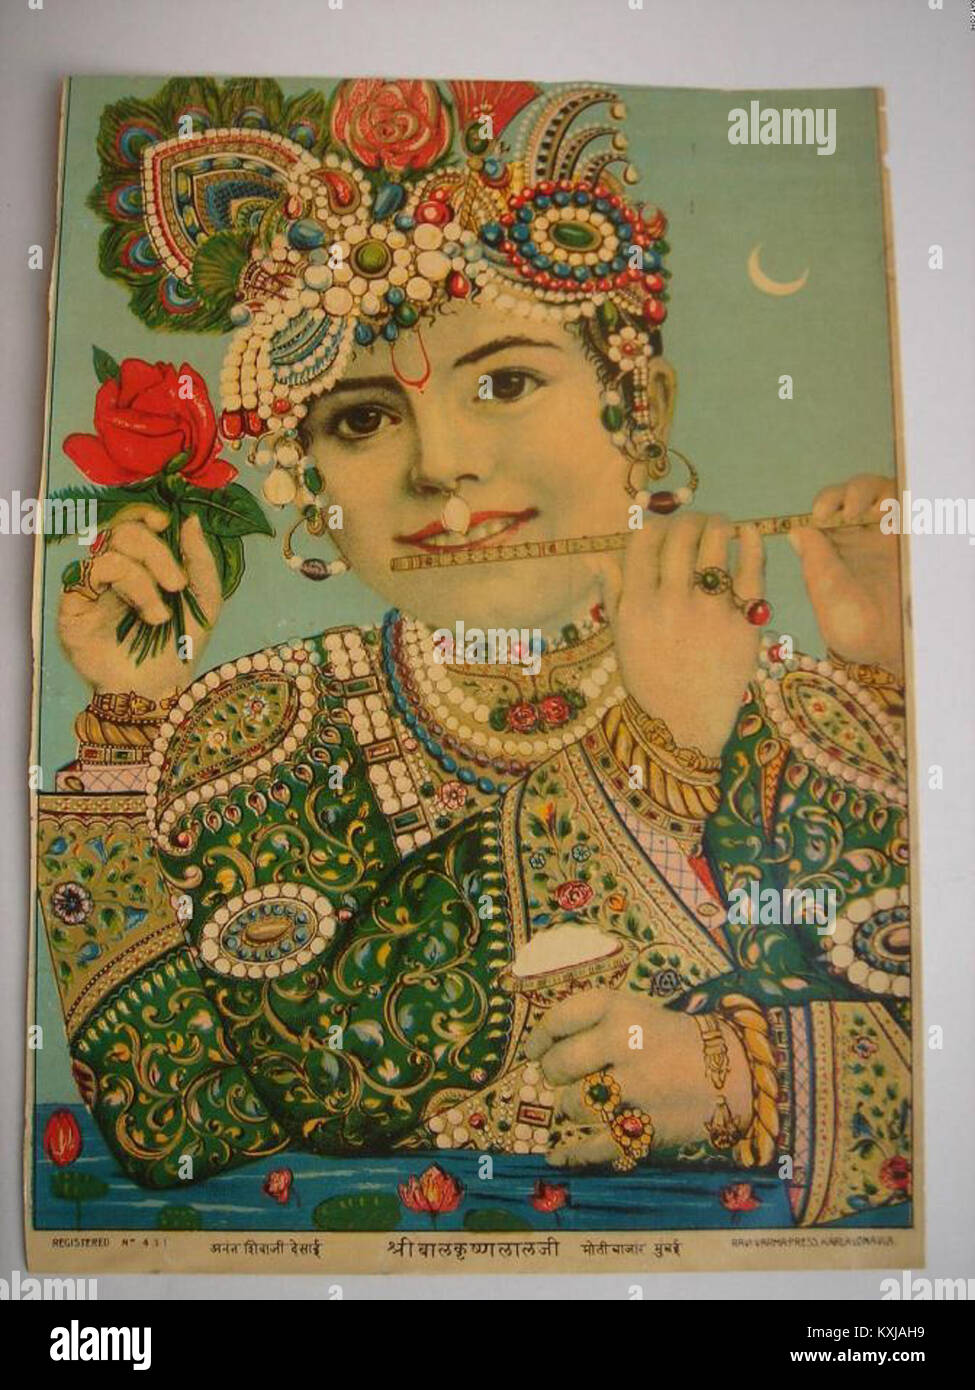 Another four-armed ('chatur-bhuj') vision of the adorable Krishna, with his irresistible flute Stock Photo